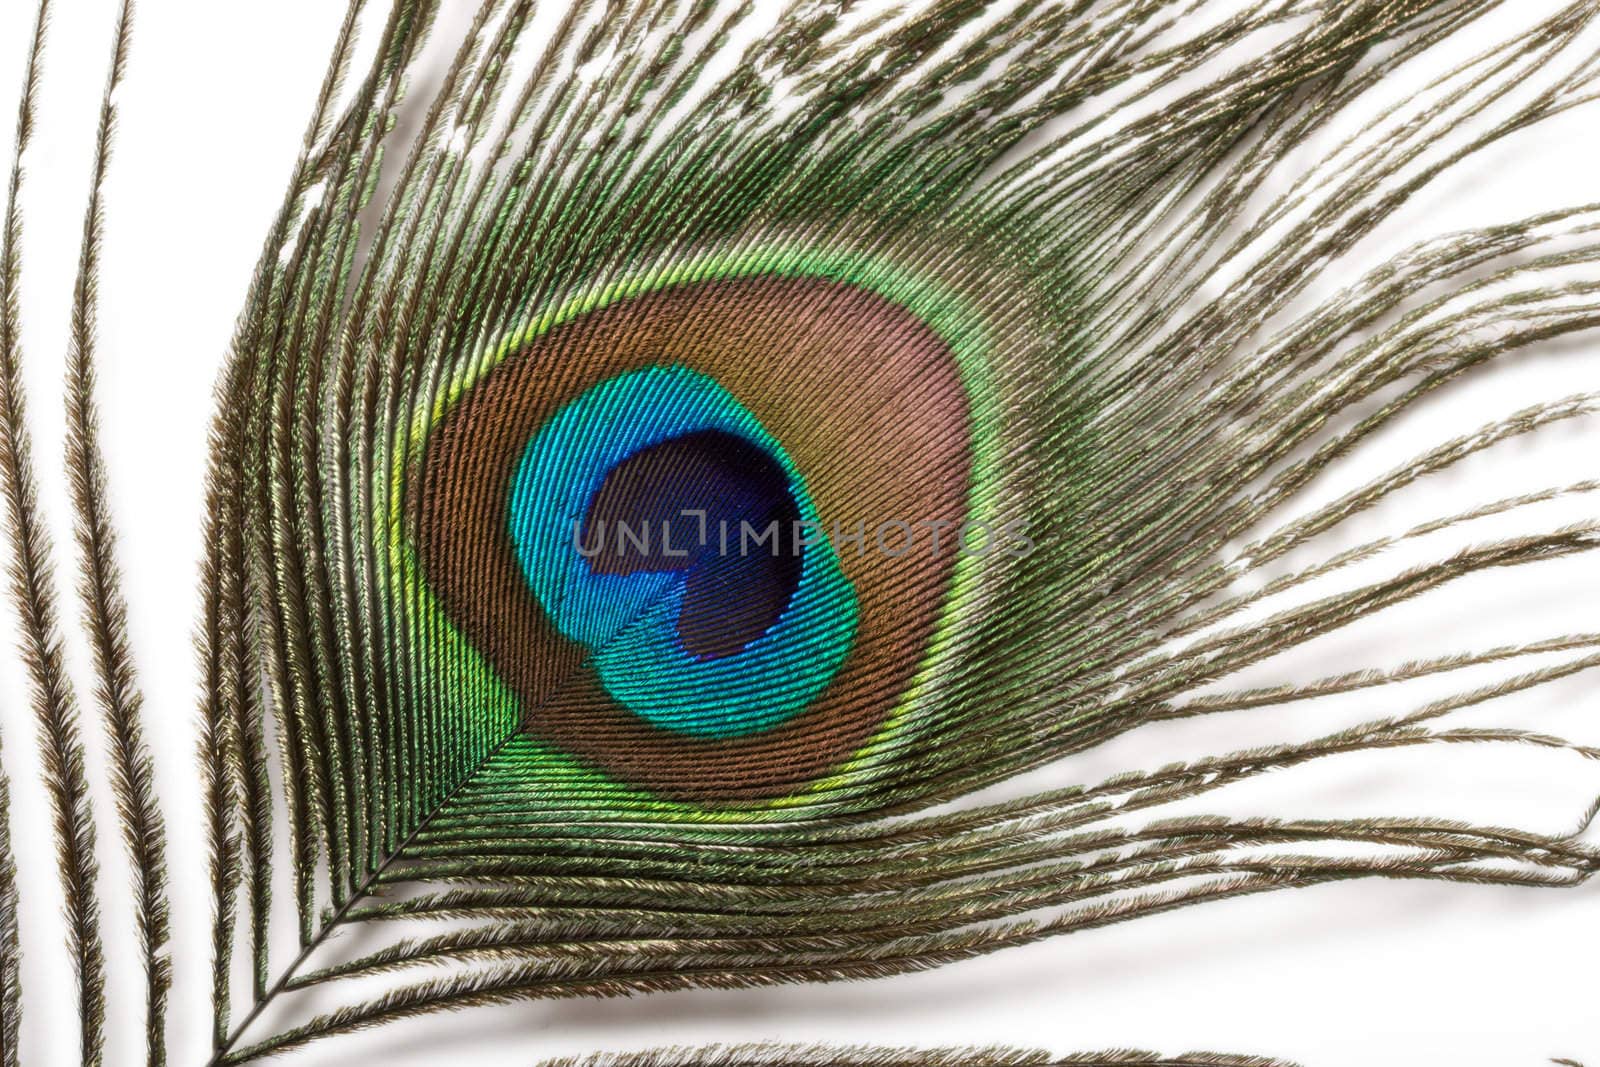 Peacock plume close up